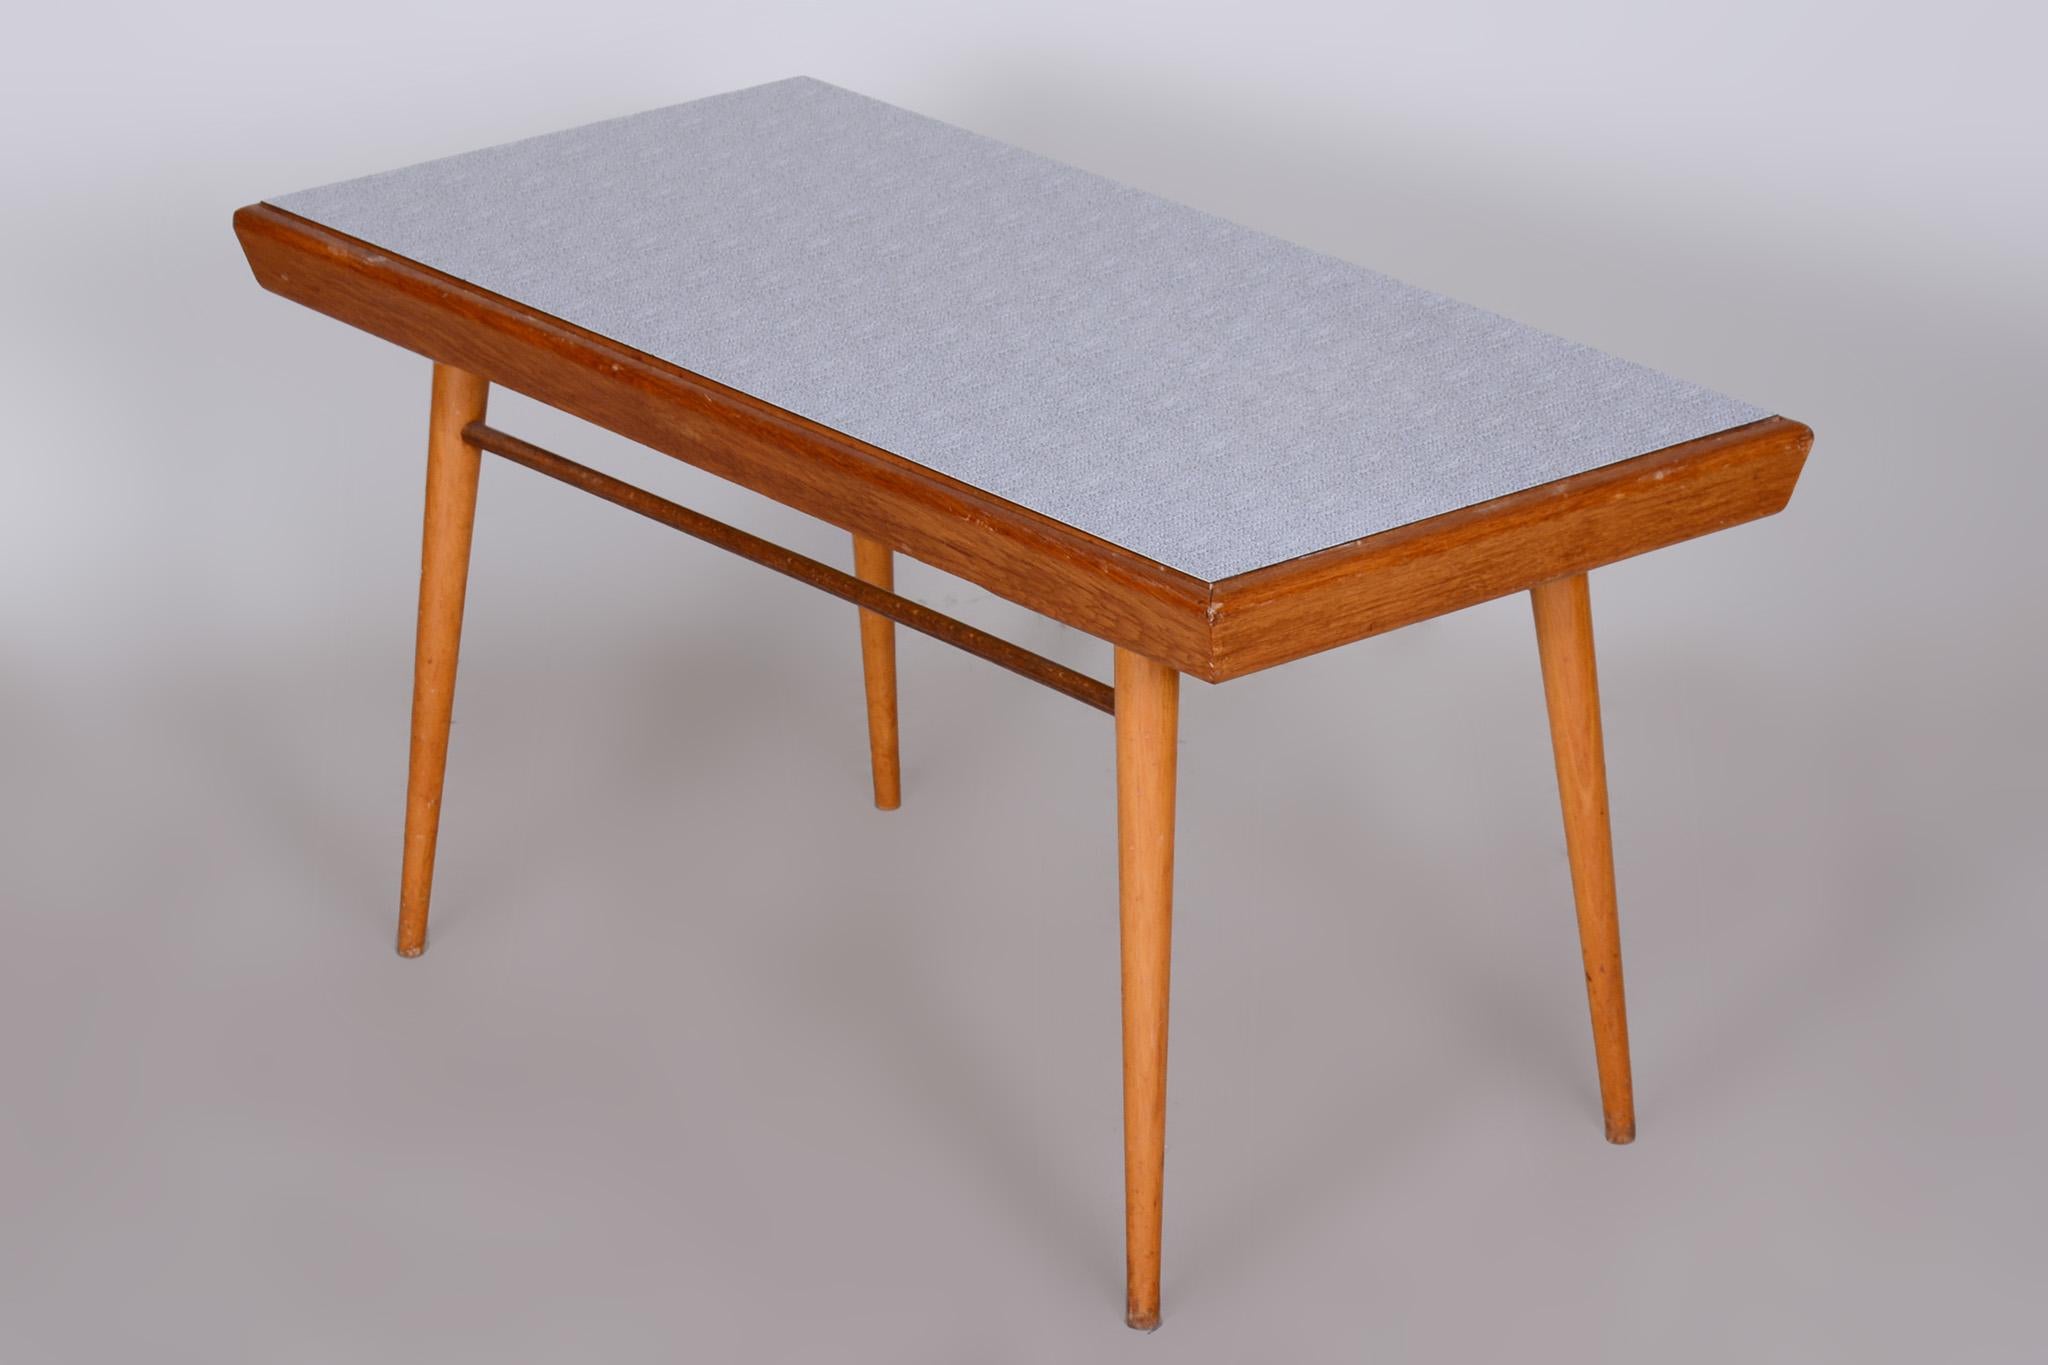 Wood Oak Midcentury Coffee Table, Well-Preserved Condition, Czechia, 1950s For Sale